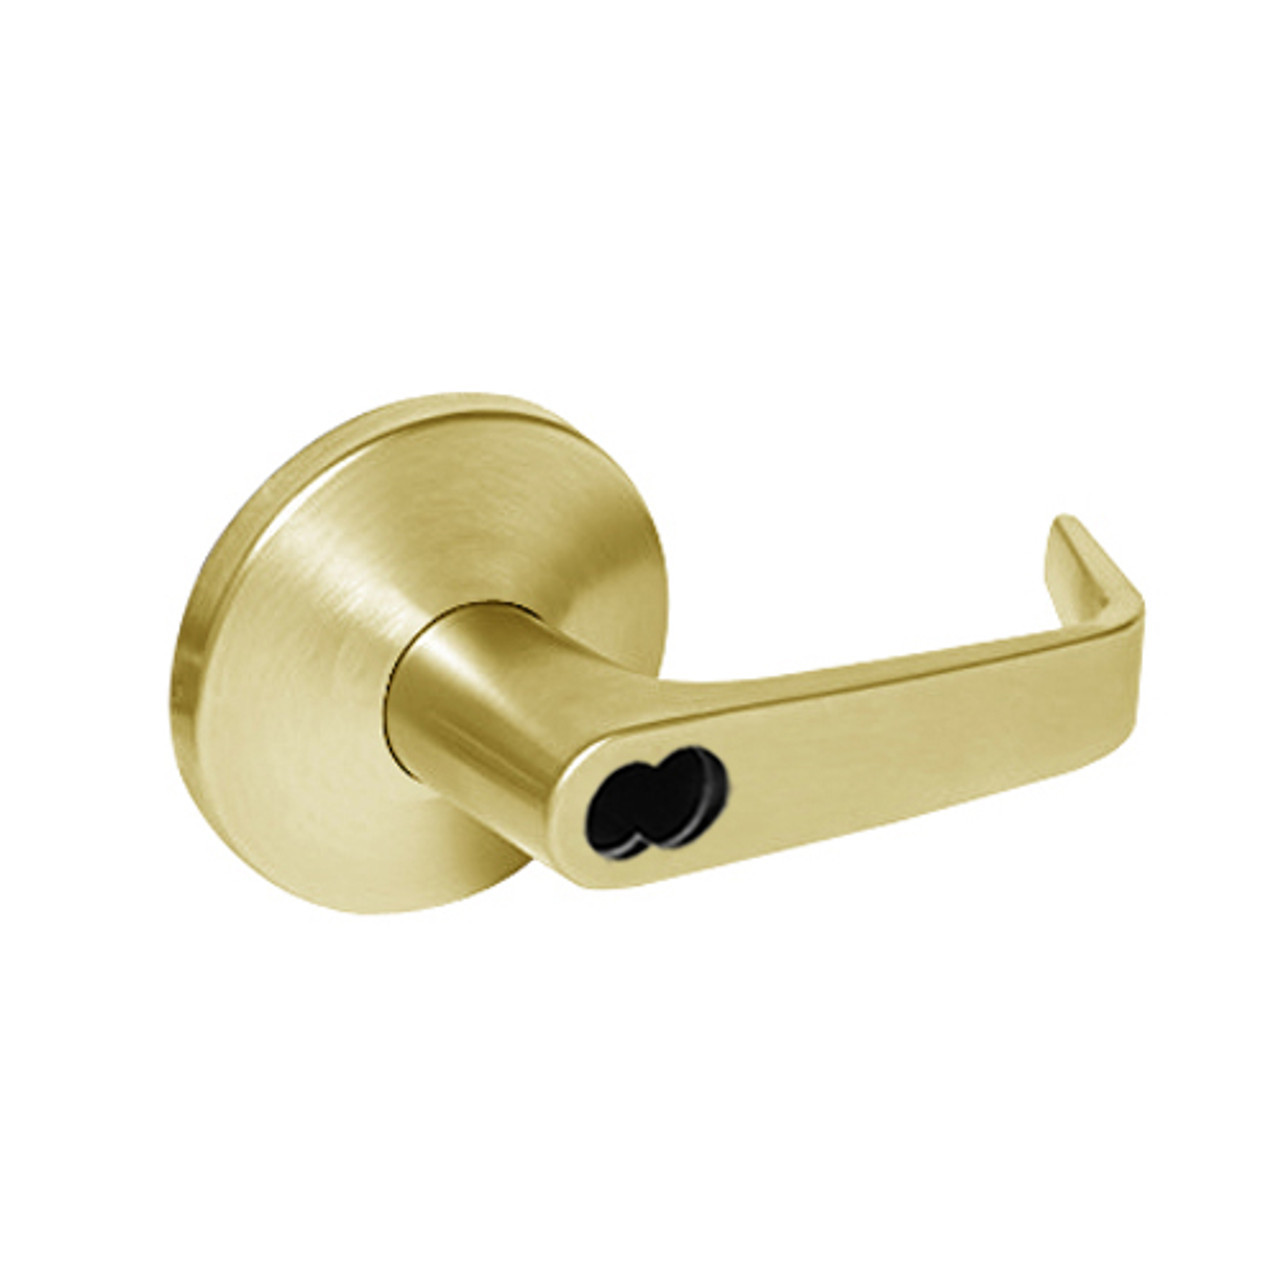 9K37A15LS3605 Best 9K Series Dormitory or Storeroom Cylindrical Lever Locks with Contour Angle with Return Lever Design Accept 7 Pin Best Core in Bright Brass